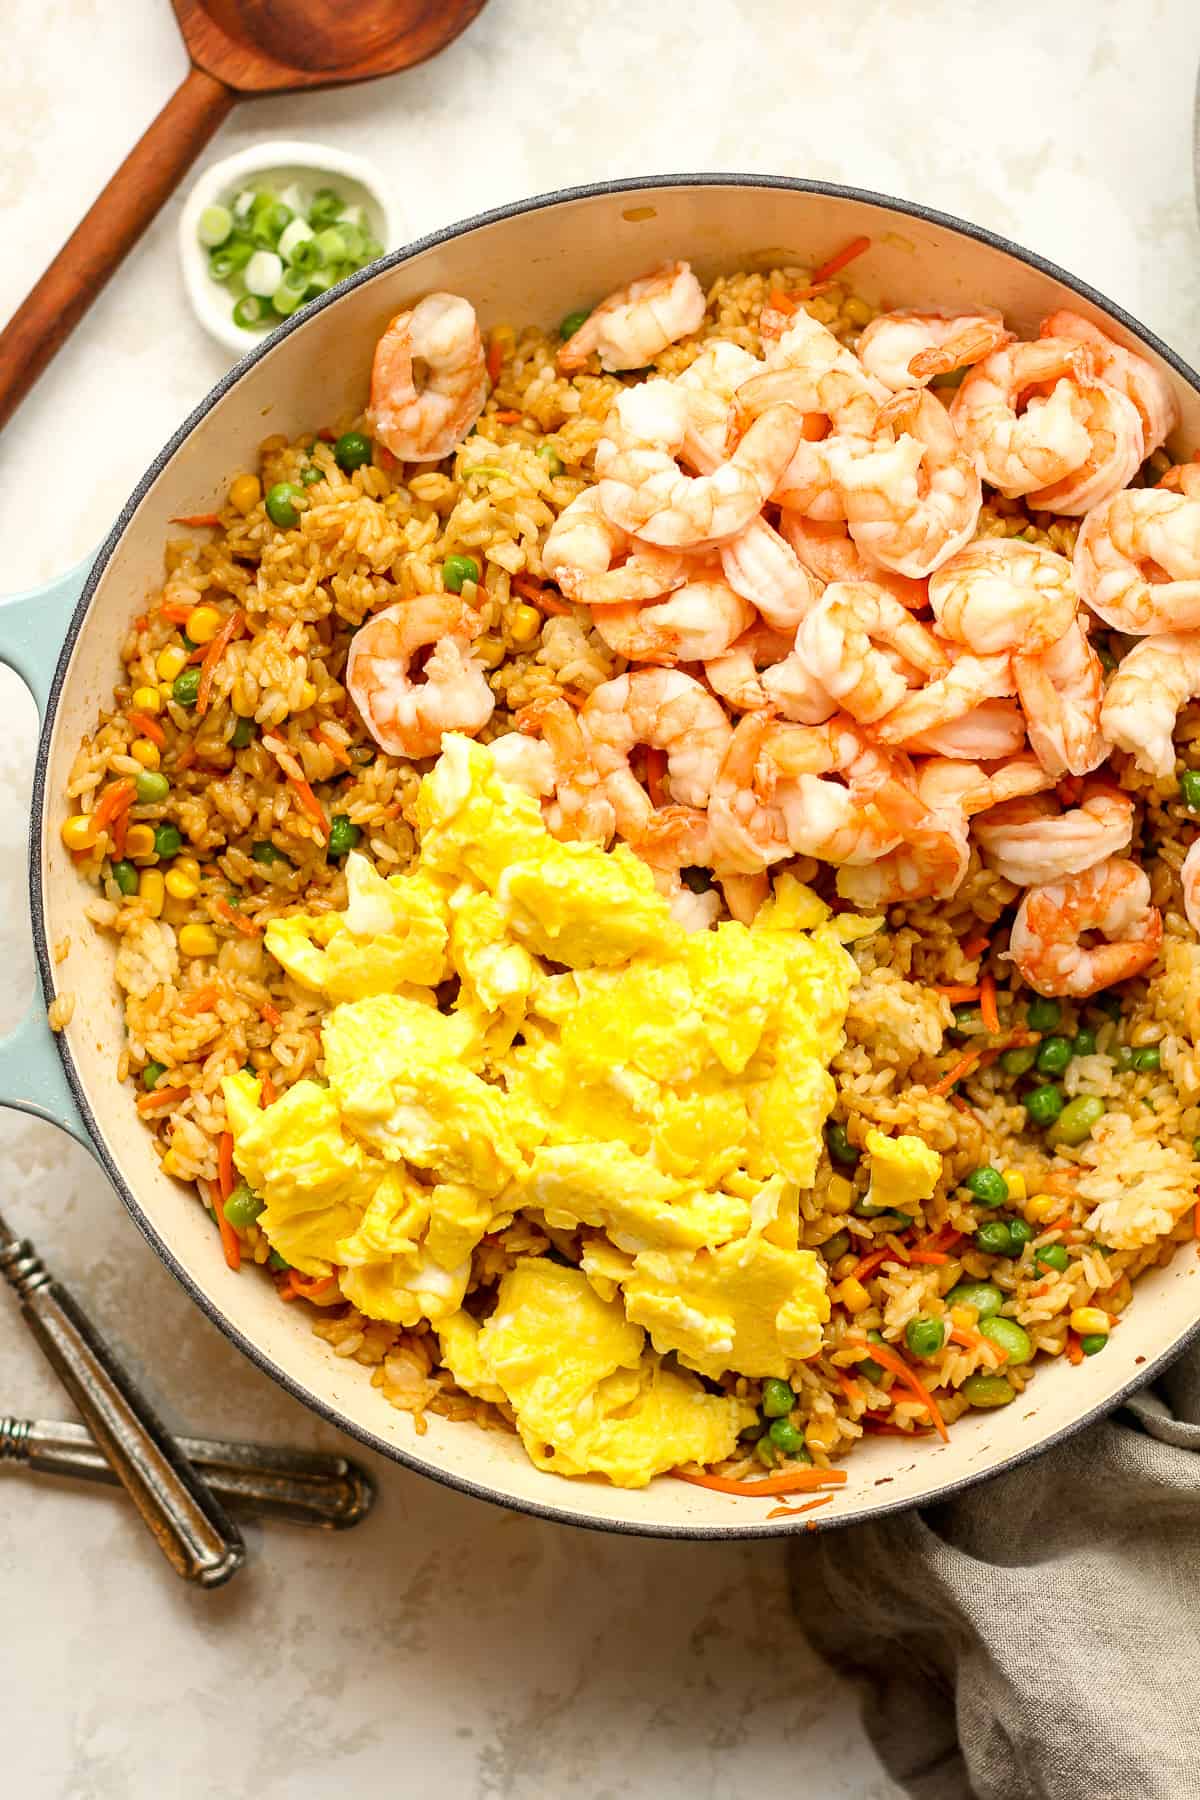 The pot of fried rice with shrimp and soft eggs on top.